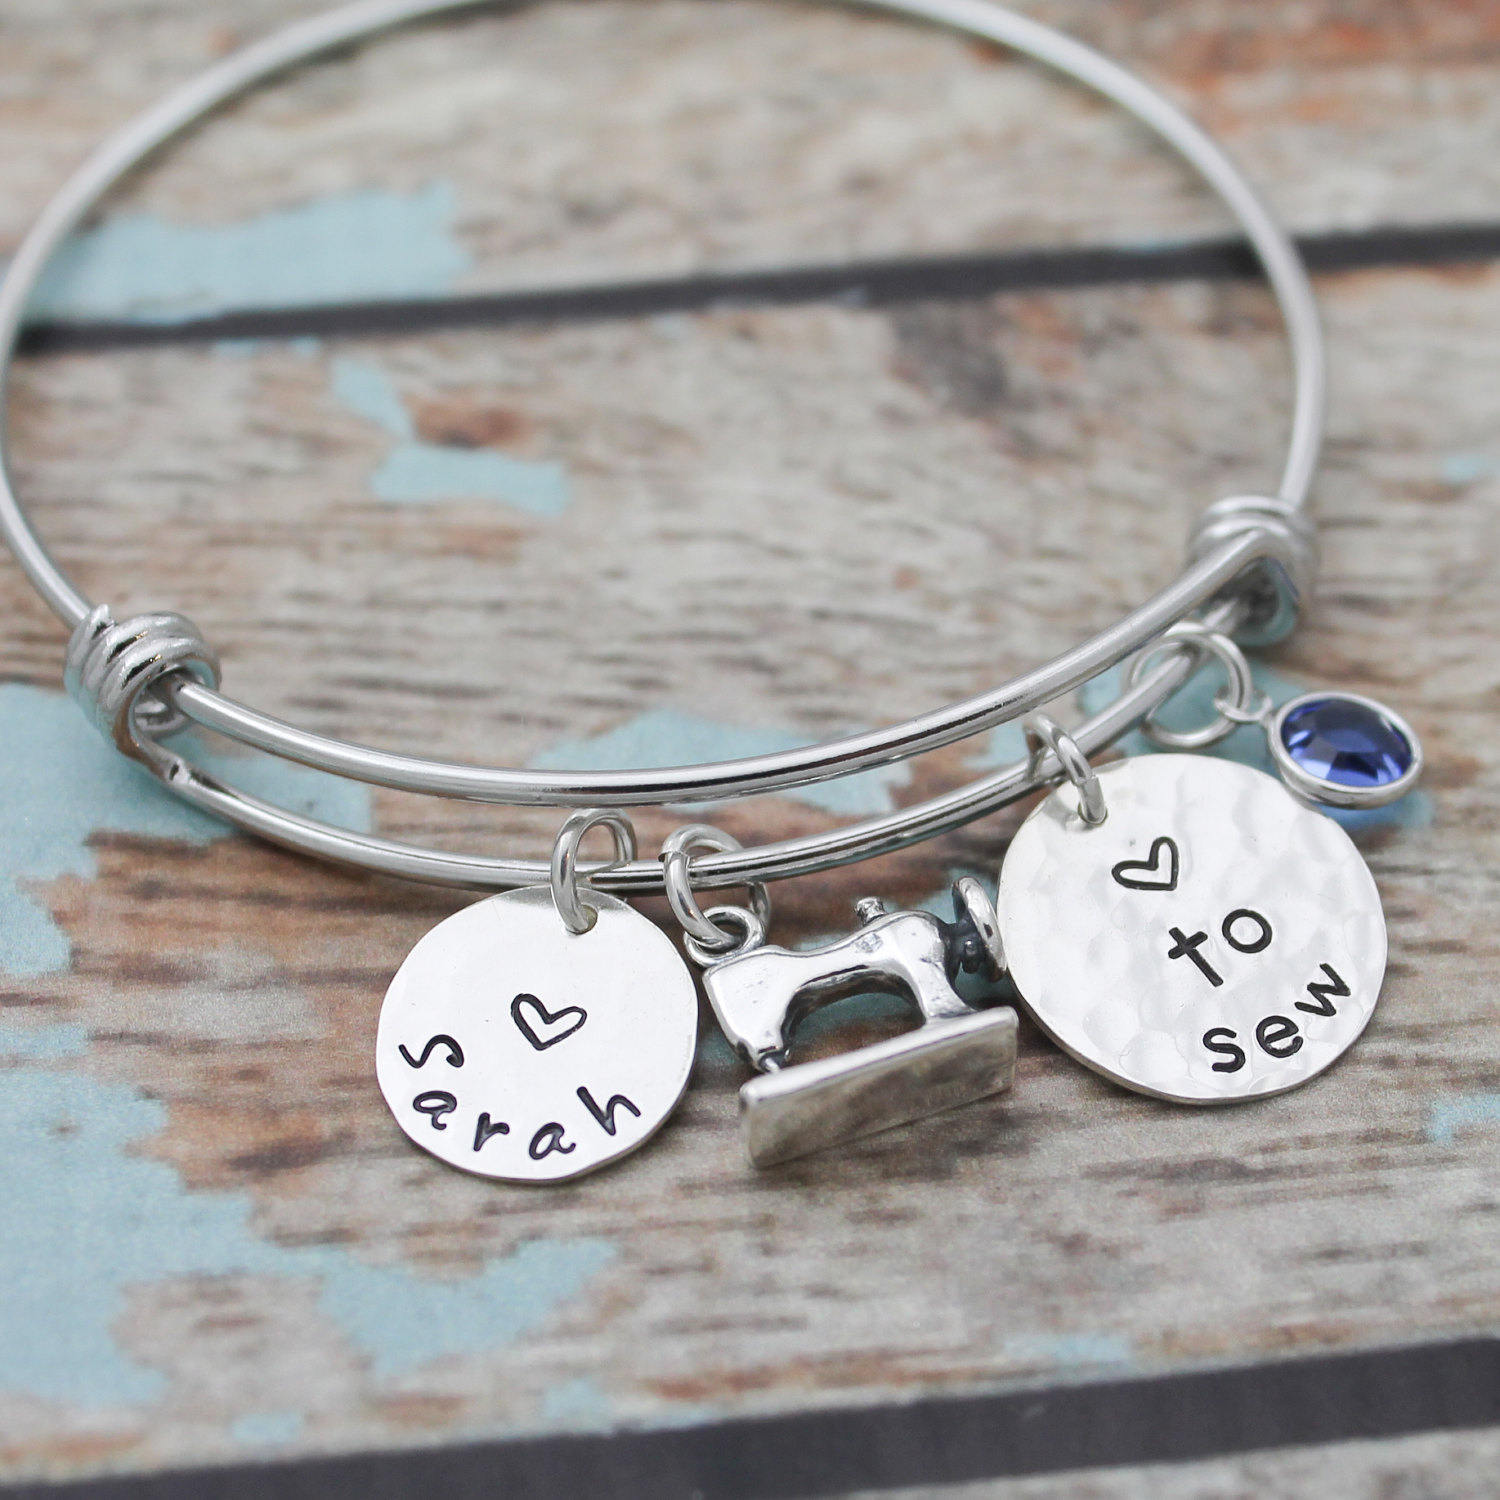 Personalized Bangle, Choose Your Hobby, Sewing, Knitting, Biking, Dancing, Photography, Music, Theater, Gymnastics Hand Stamped Bracelet